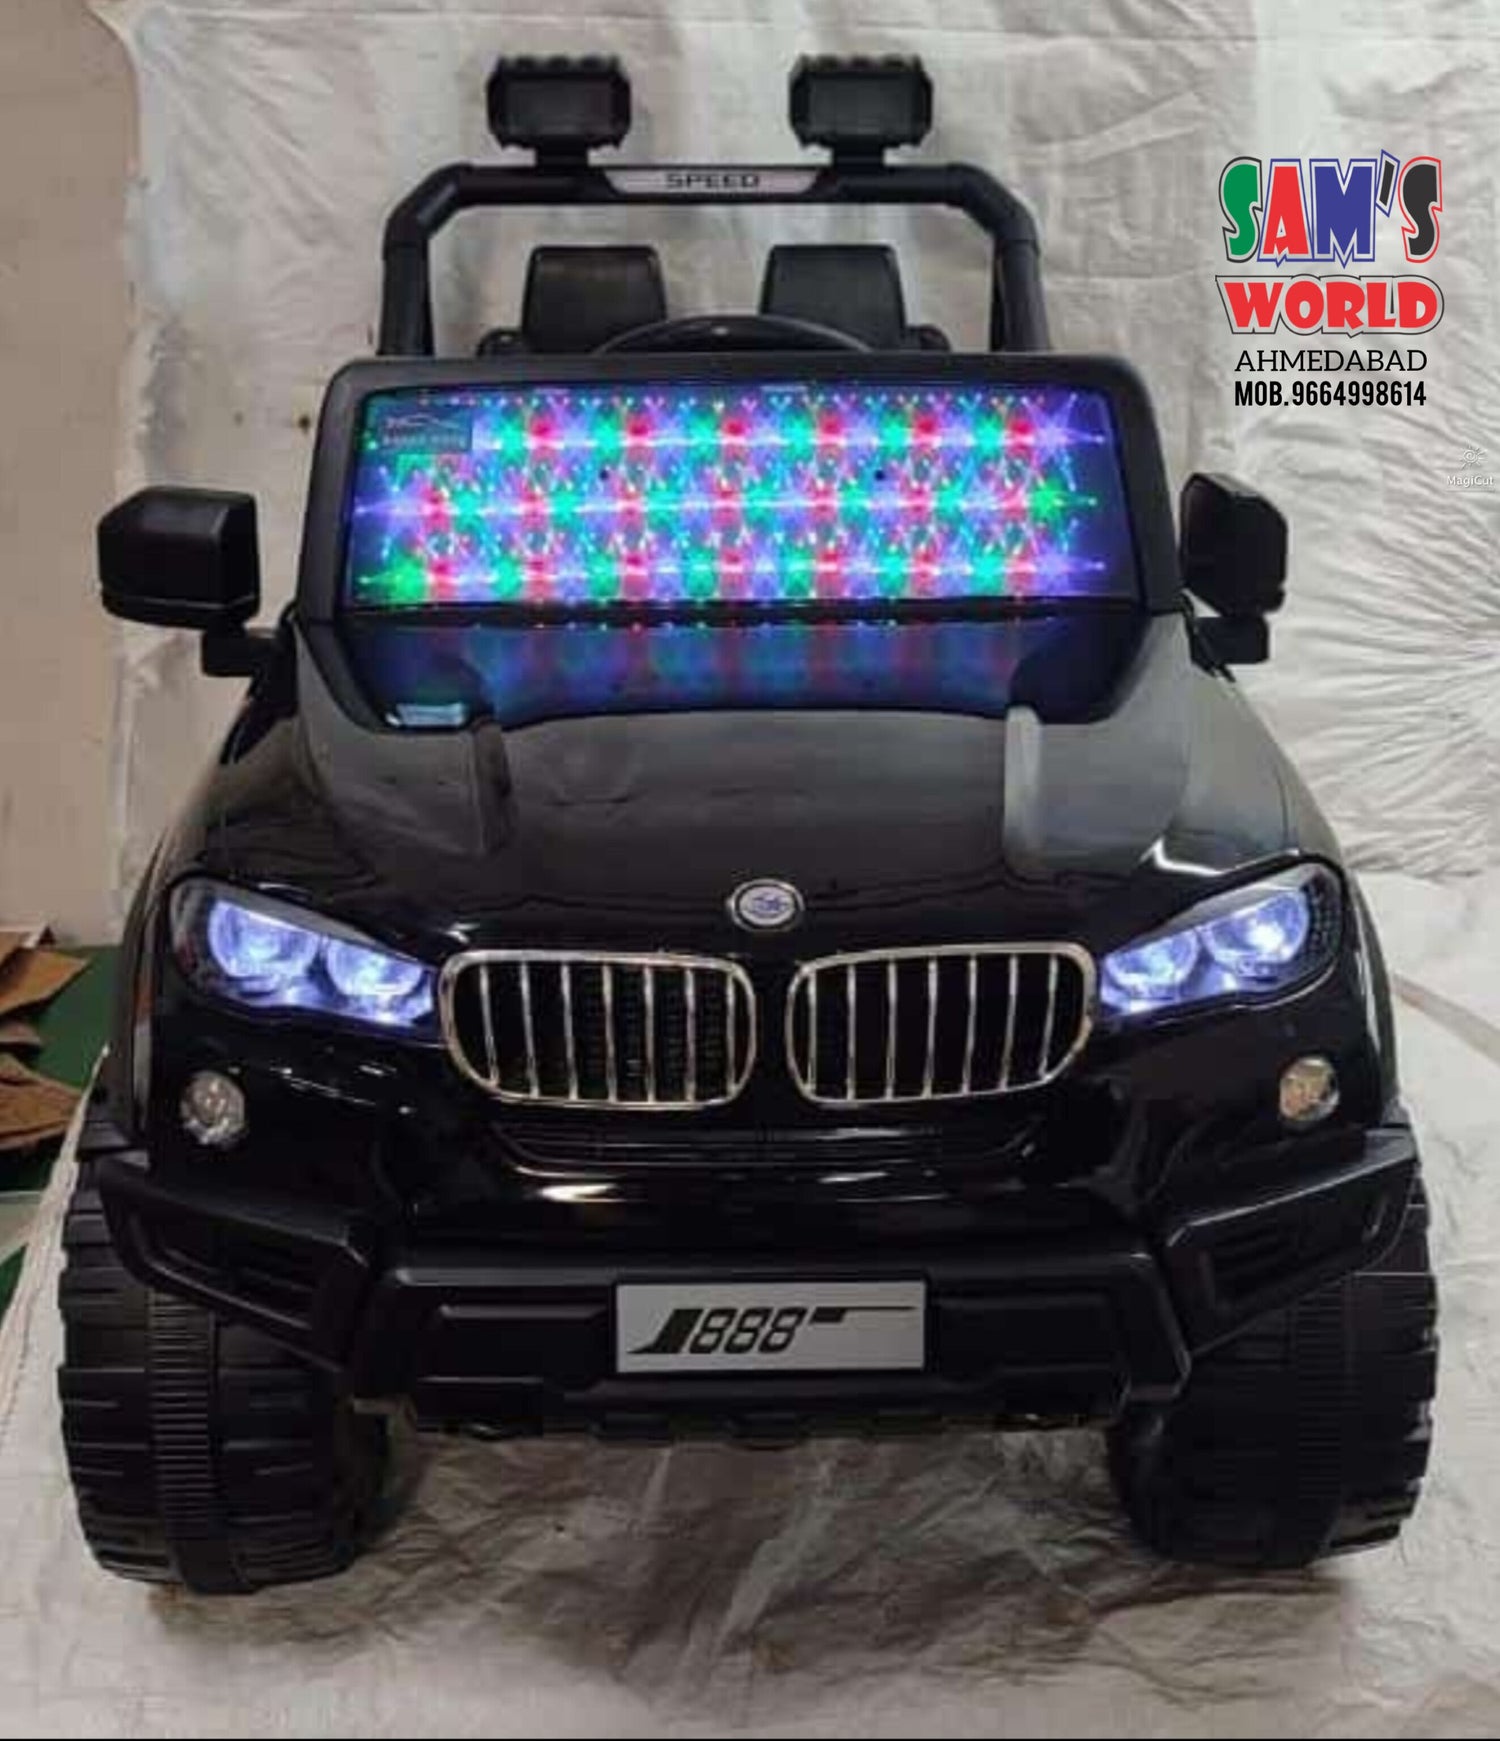 New 2023 Suv for 1 TO 8 age boys and girls | battery operated best car in Ahmedabad Gujarat | 888 - samstoy.in